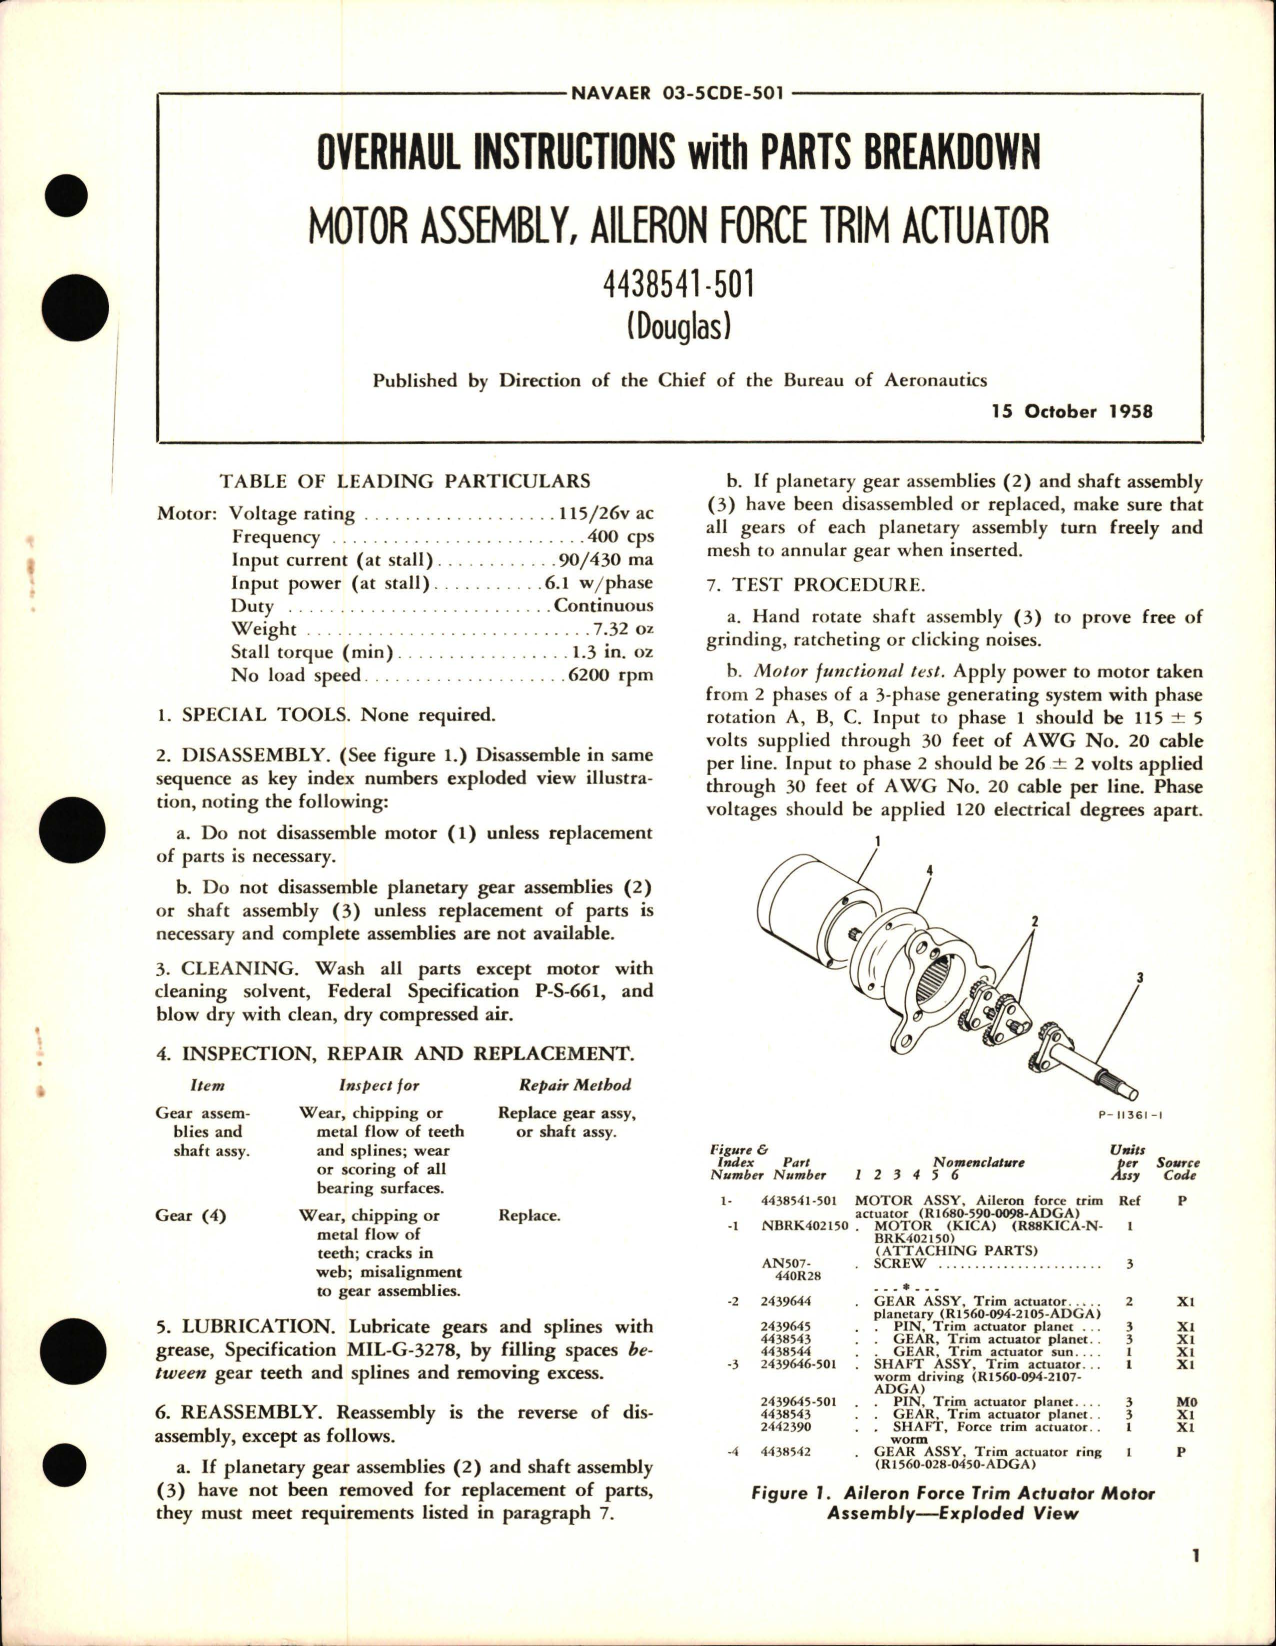 Sample page 1 from AirCorps Library document: Overhaul Instructions with Parts Breakdown for Motor Assembly, Aileron Force Trim Actuator - Part 4438541-501